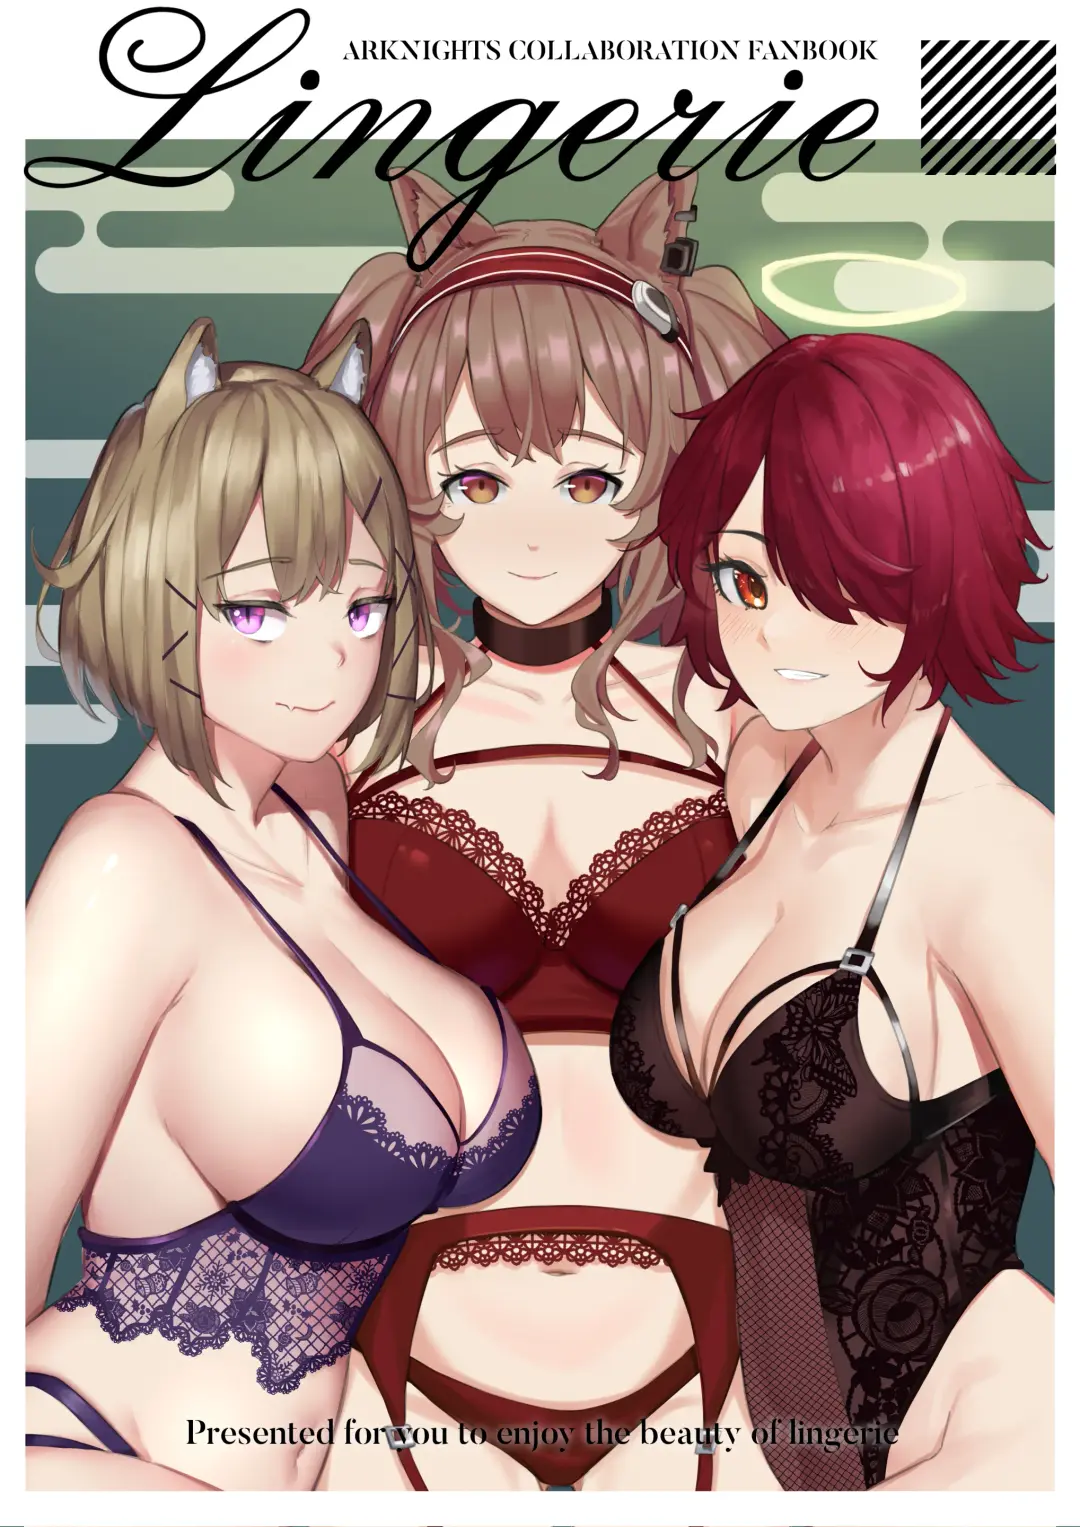 Read Arknights Lingerie Collaboration Fanbook - Fhentai.net